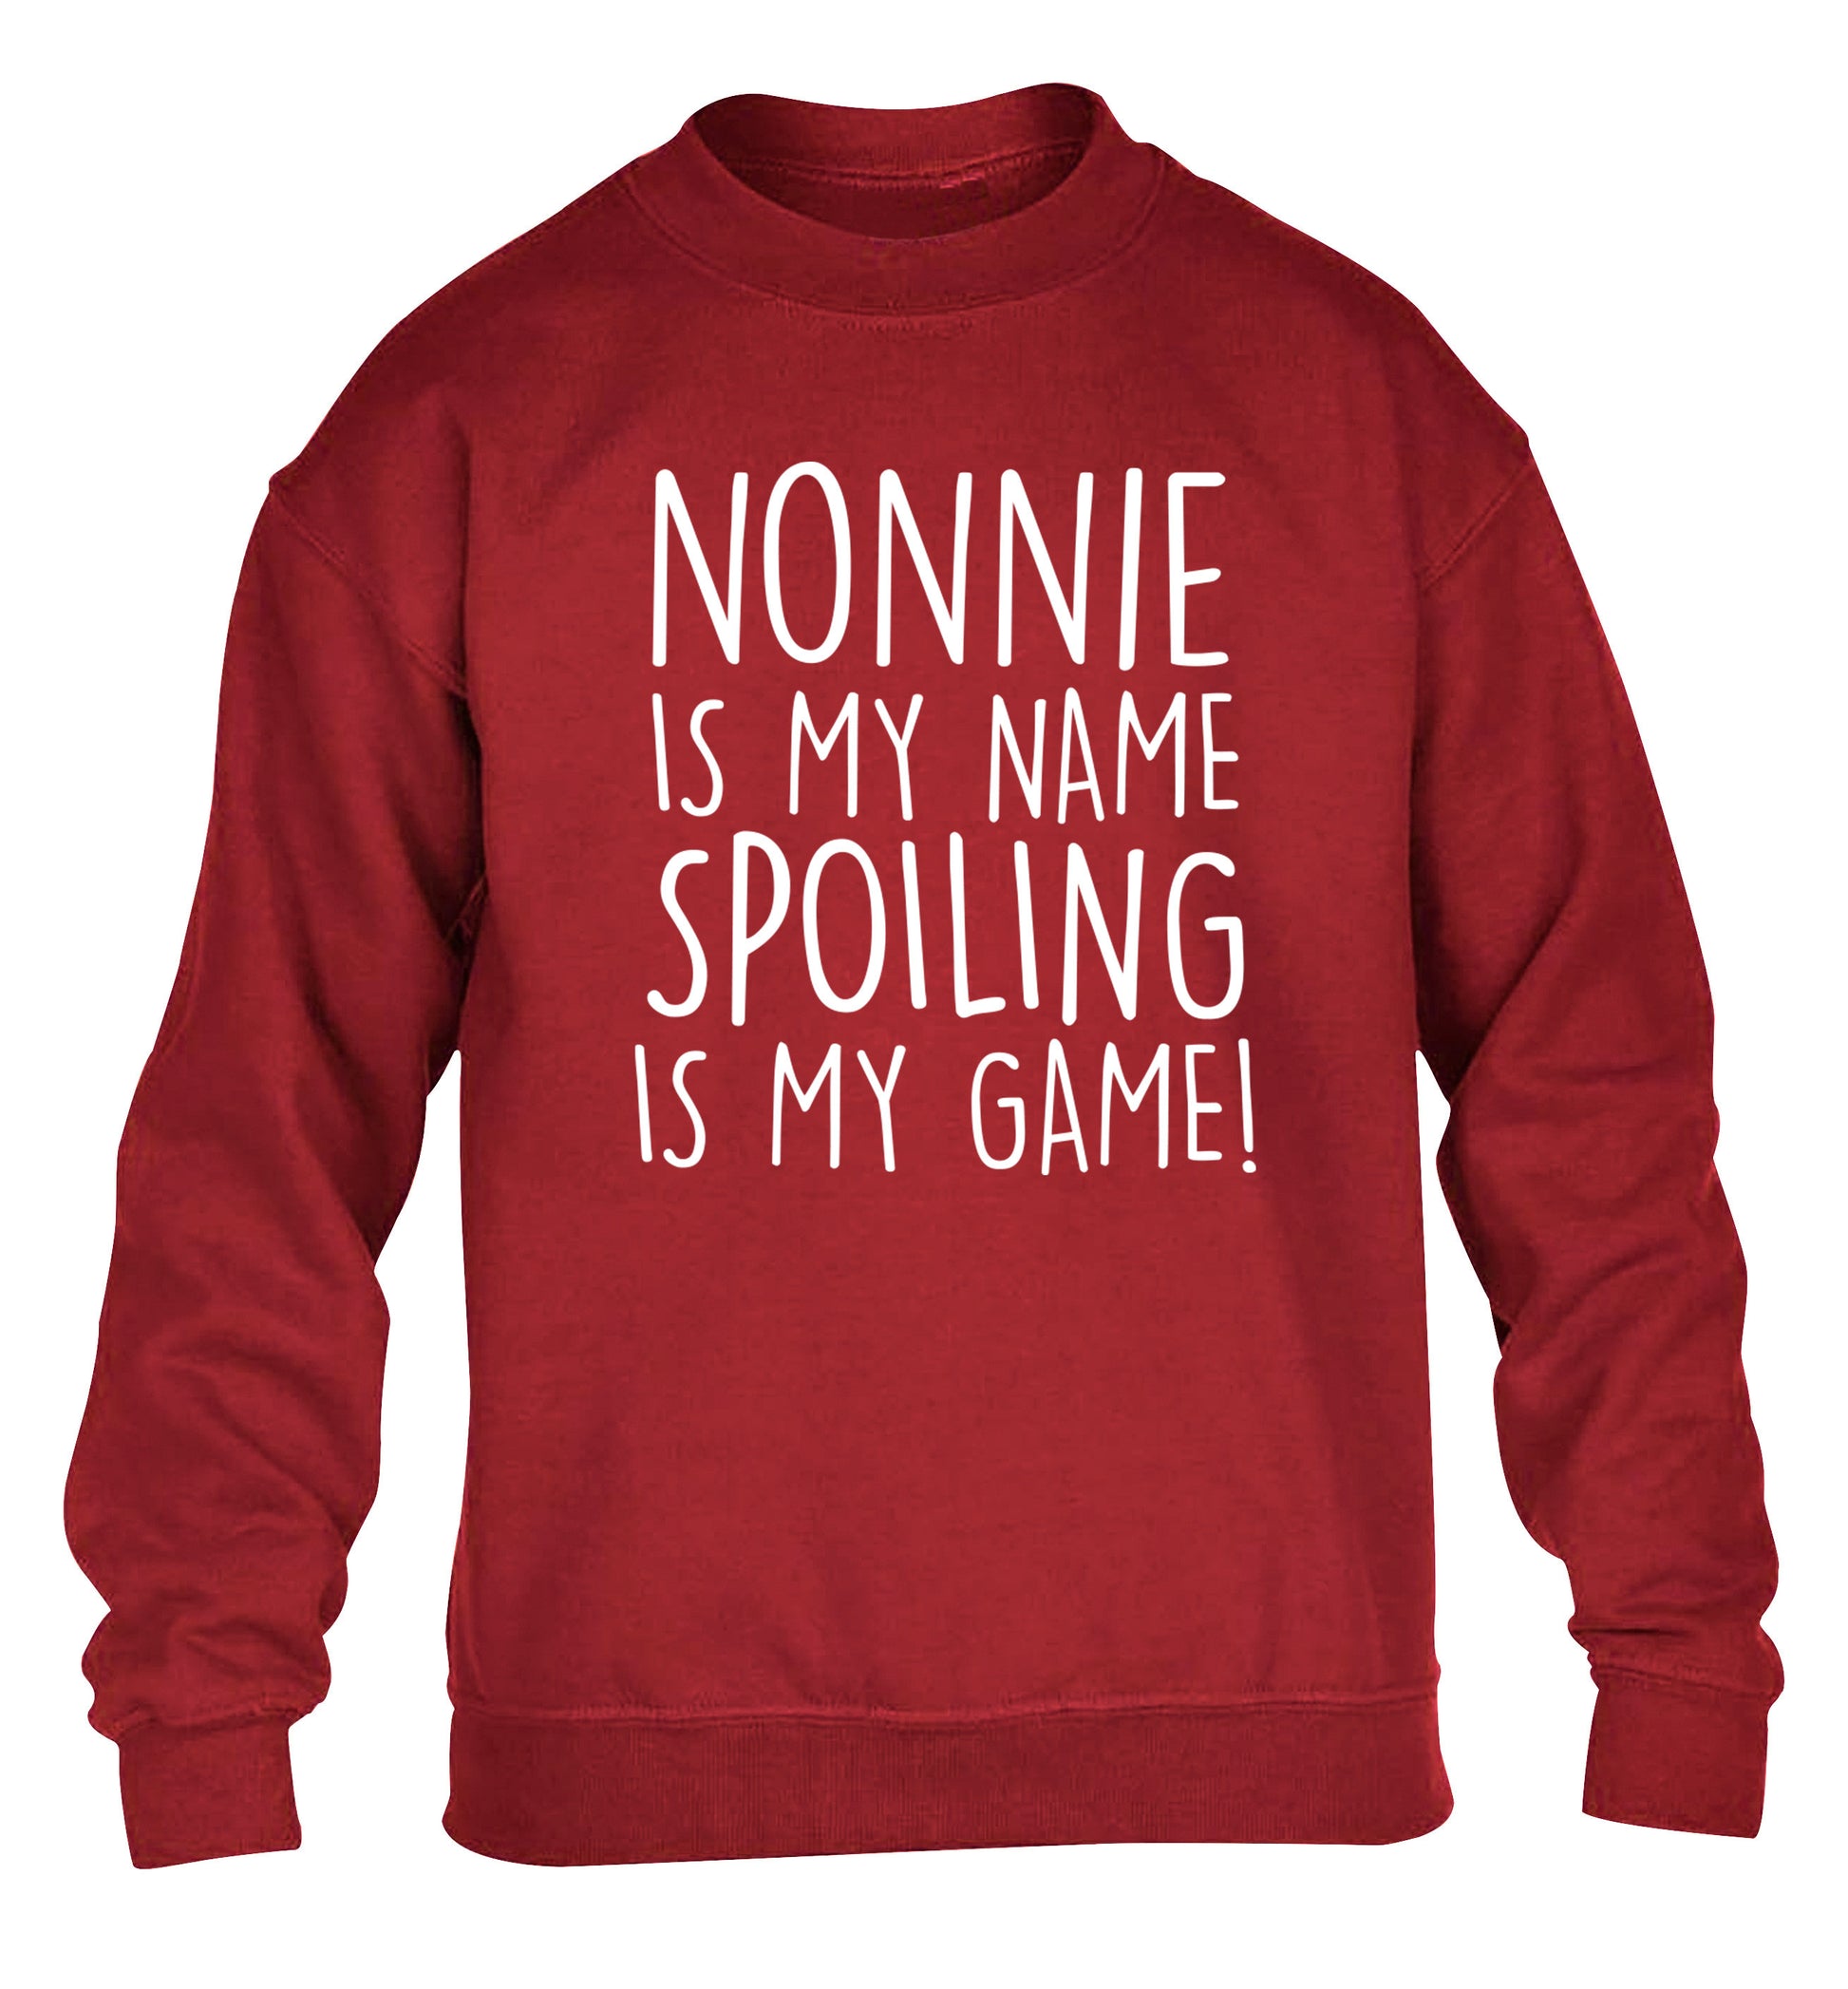 Nonnie is my name, spoiling is my game children's grey sweater 12-14 Years